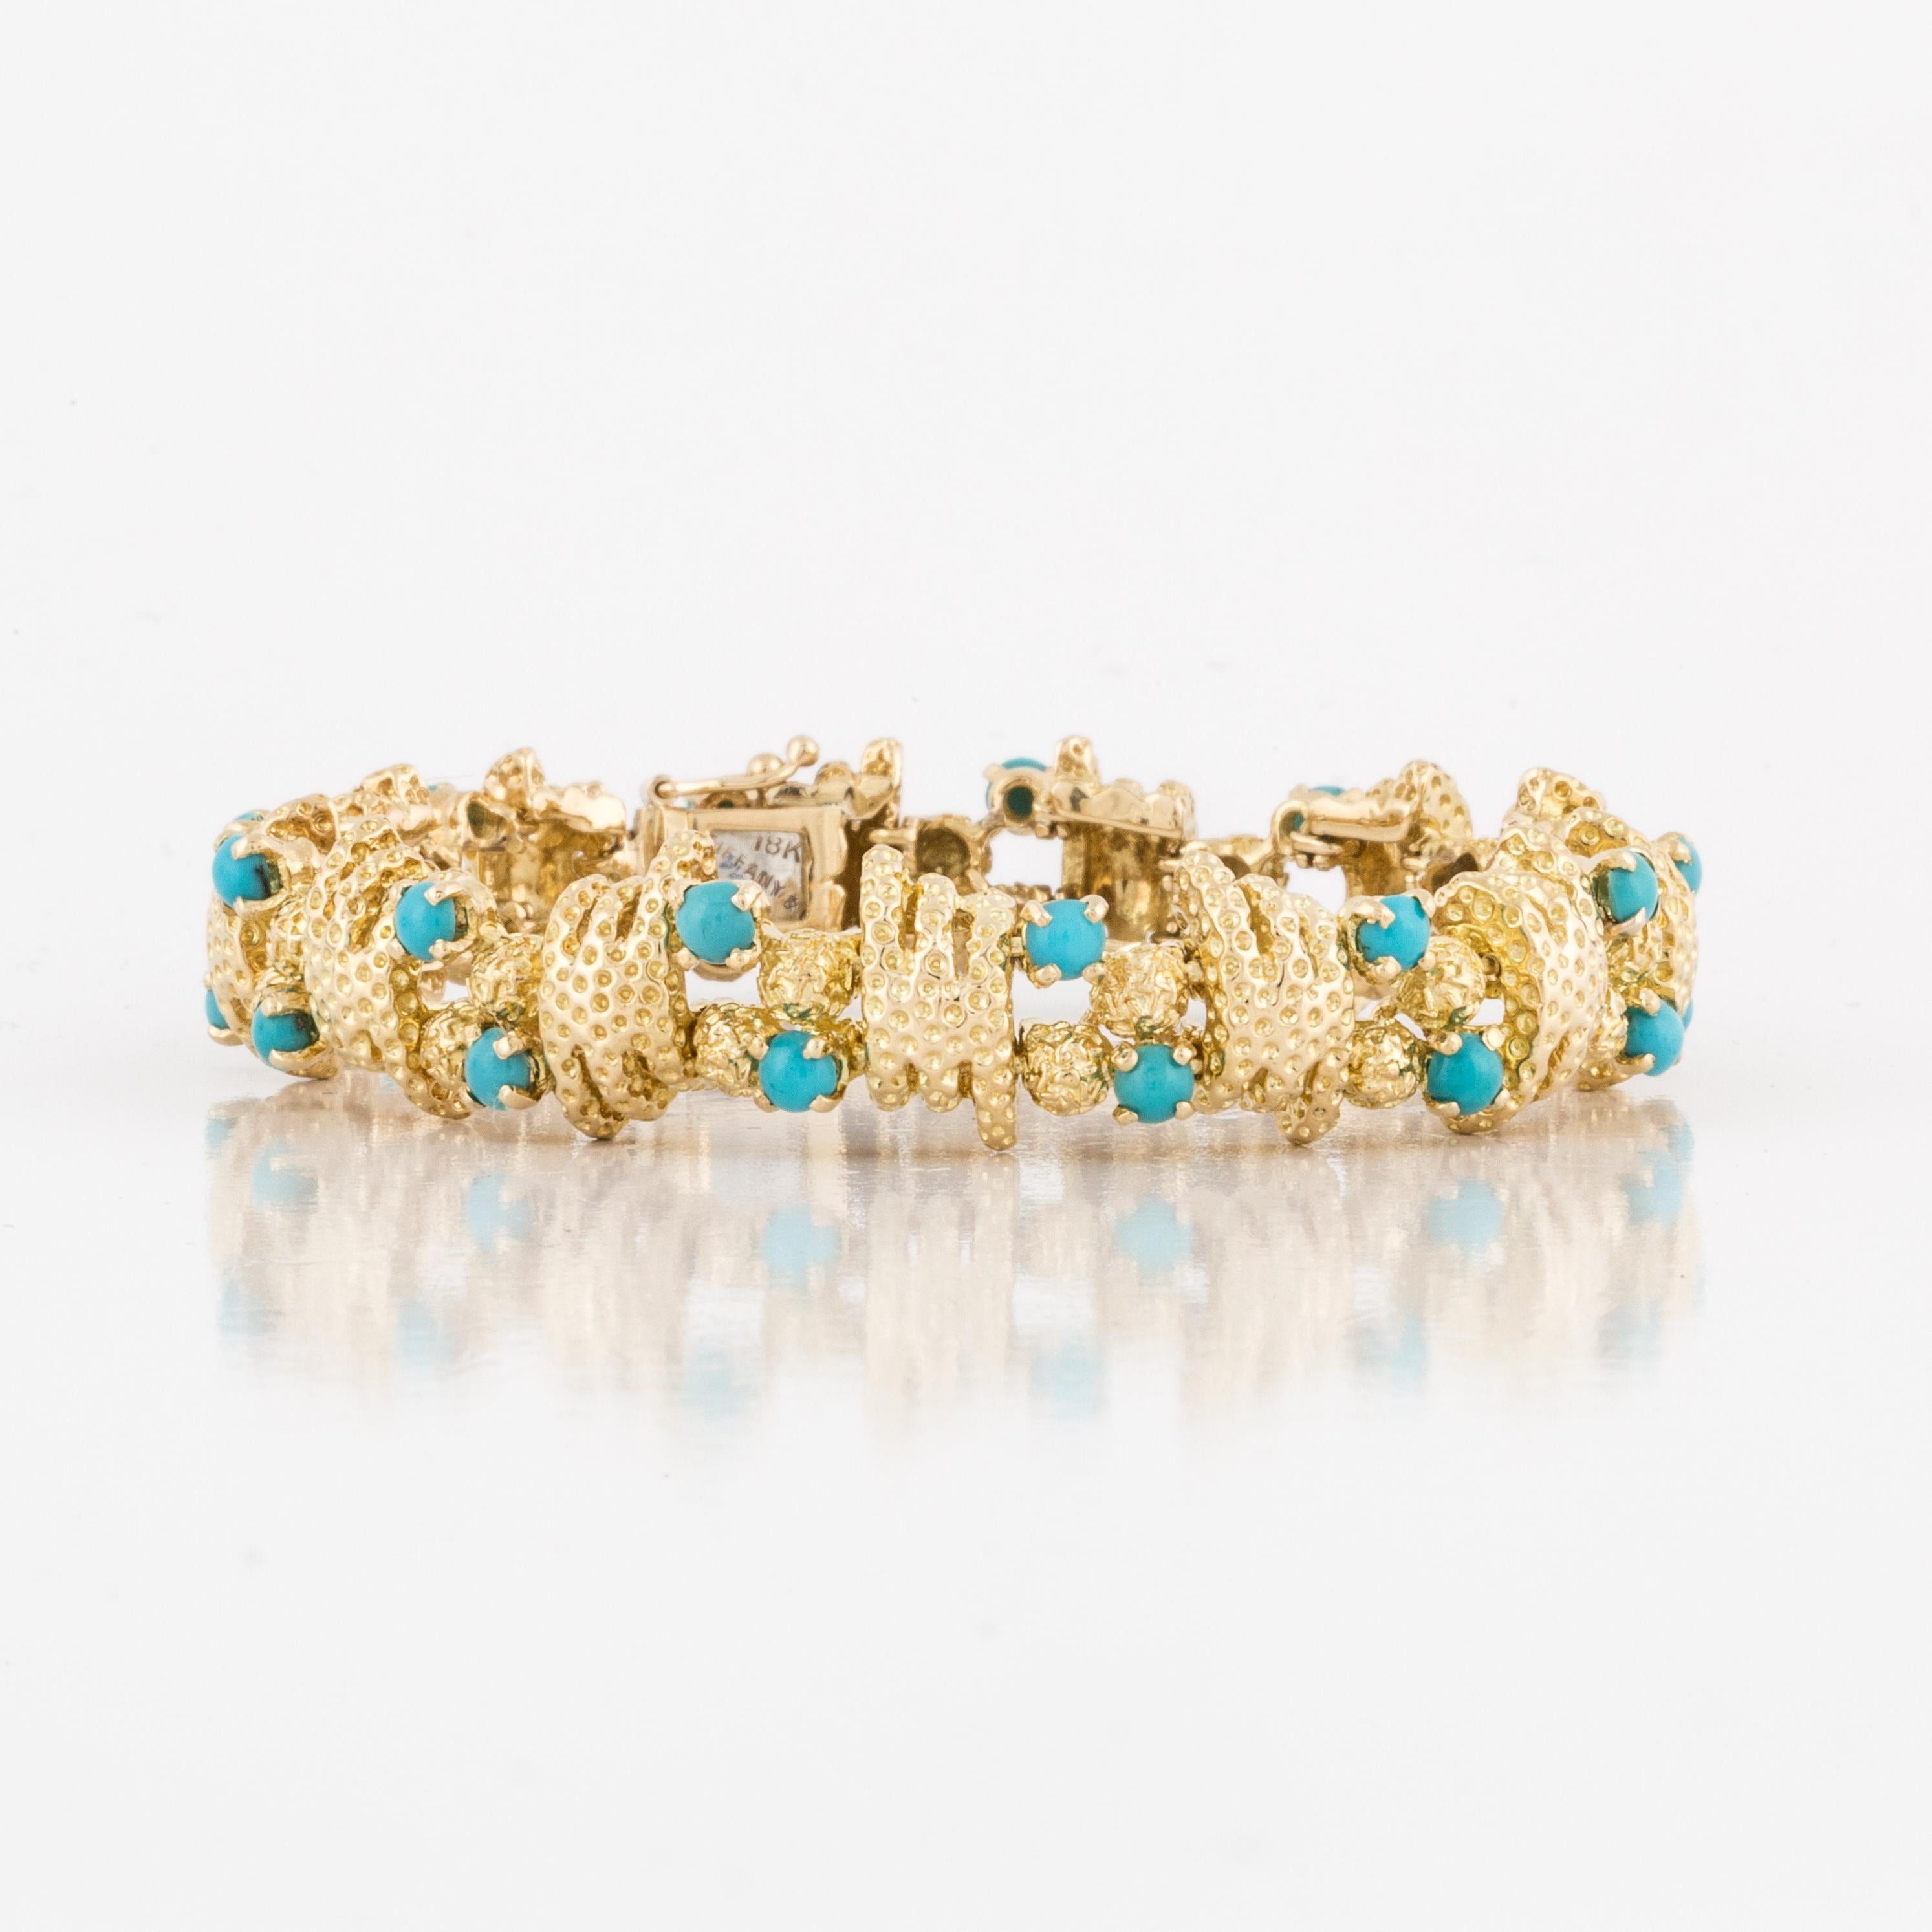 A vintage Tiffany & Co. textured 18K yellow gold bracelet featuring 26 round cabochon turquoise stones.   Circa 1960s.  Measures 7 inches long and 1/2 inch wide.  